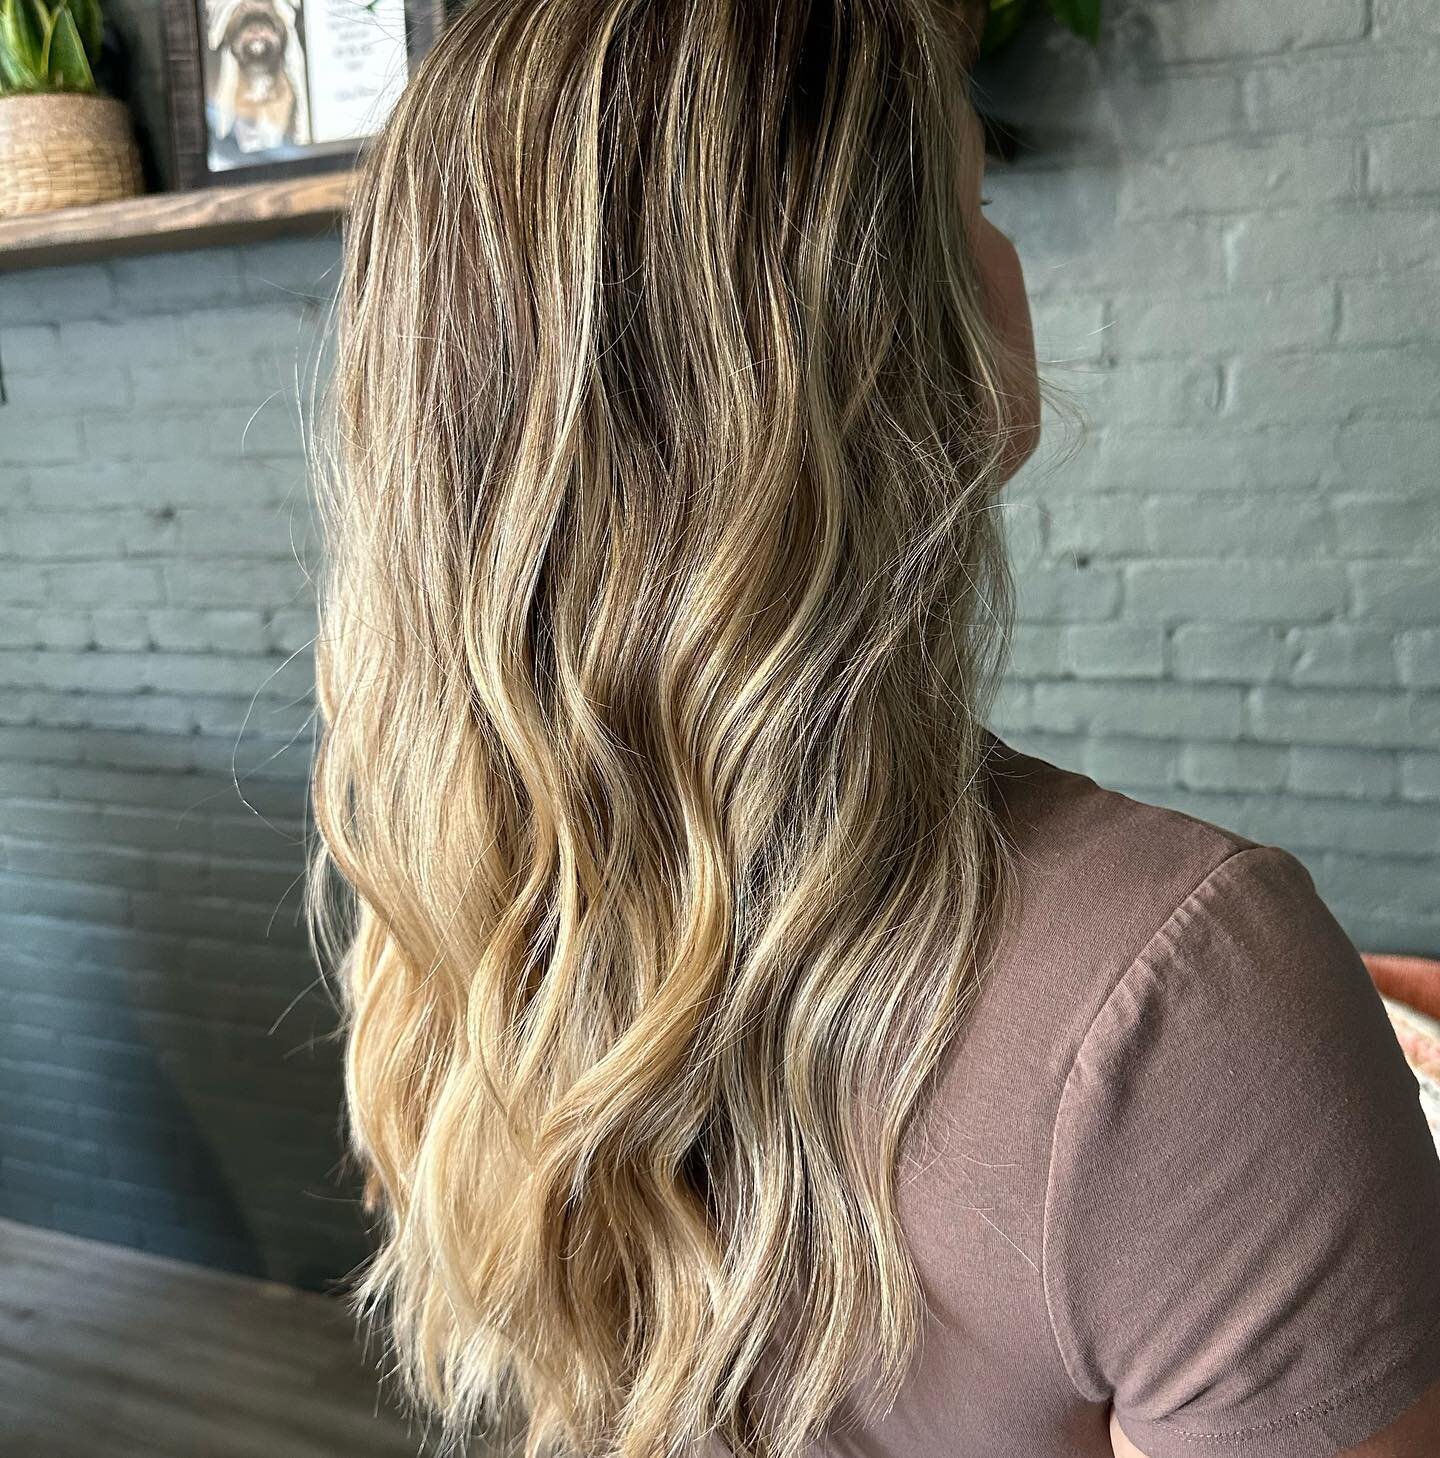 Sun-kissed and beachy🌞

Stylist: @lululevesque_stylist 

.
.
.
.
#nhhair #nhhairsalon #newhampshirehair #nhhairvibes #nhbalayage #nhcolorspecialist #nhbalayagespecialist #livedinhair 
#cooboard #southernnhhair #manchesterstylist #manchesternh #manch